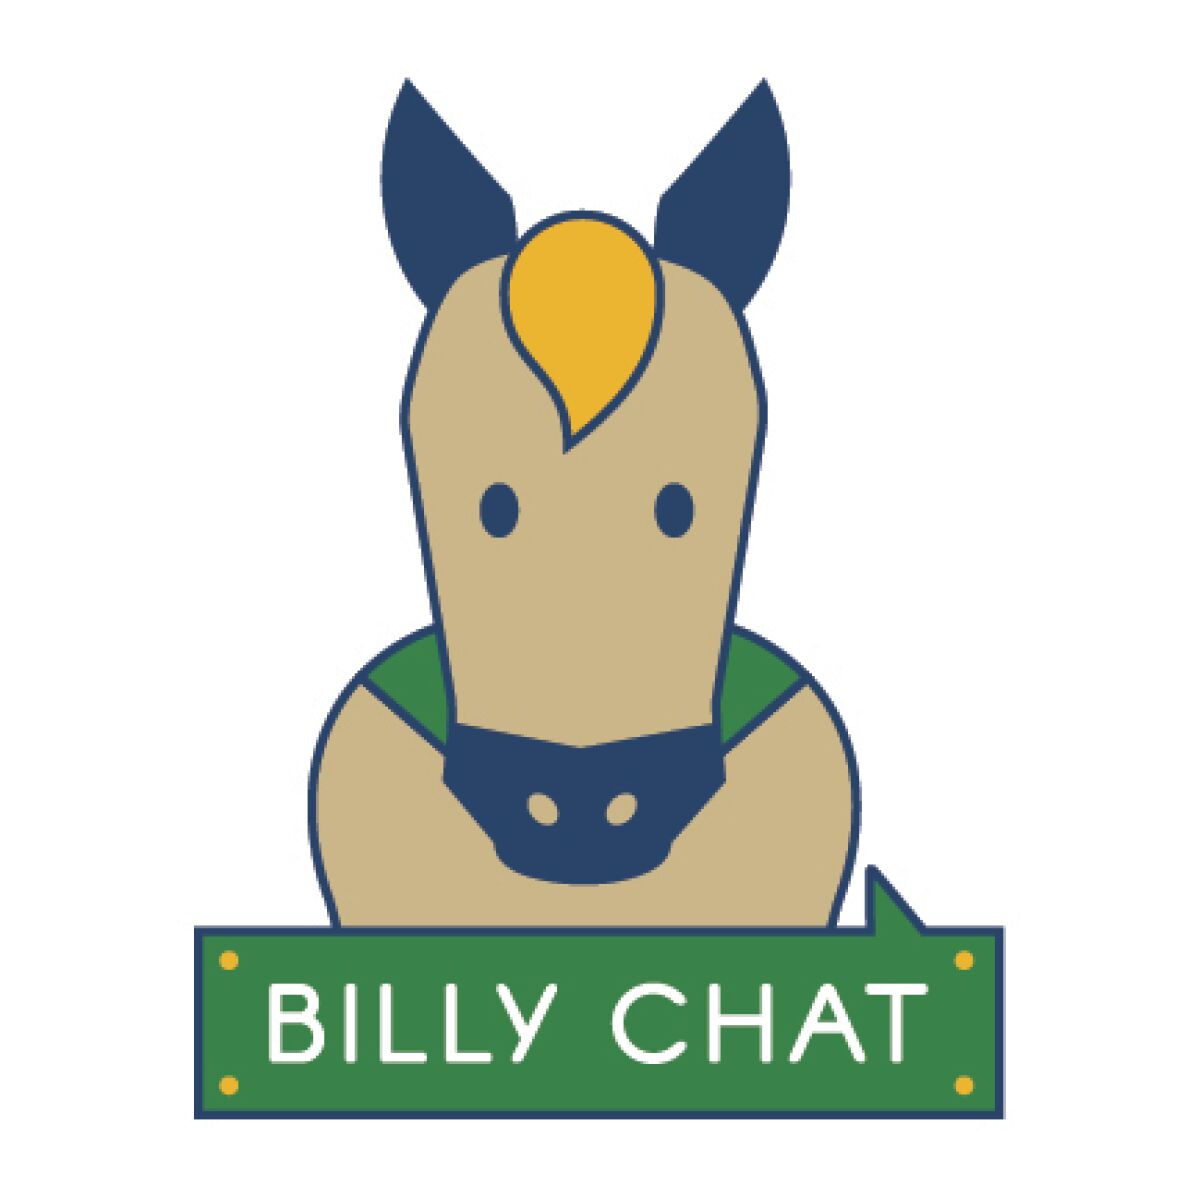 Billy Chat is a robot that uses artificial intelligence to text at Cal Poly Pomona.